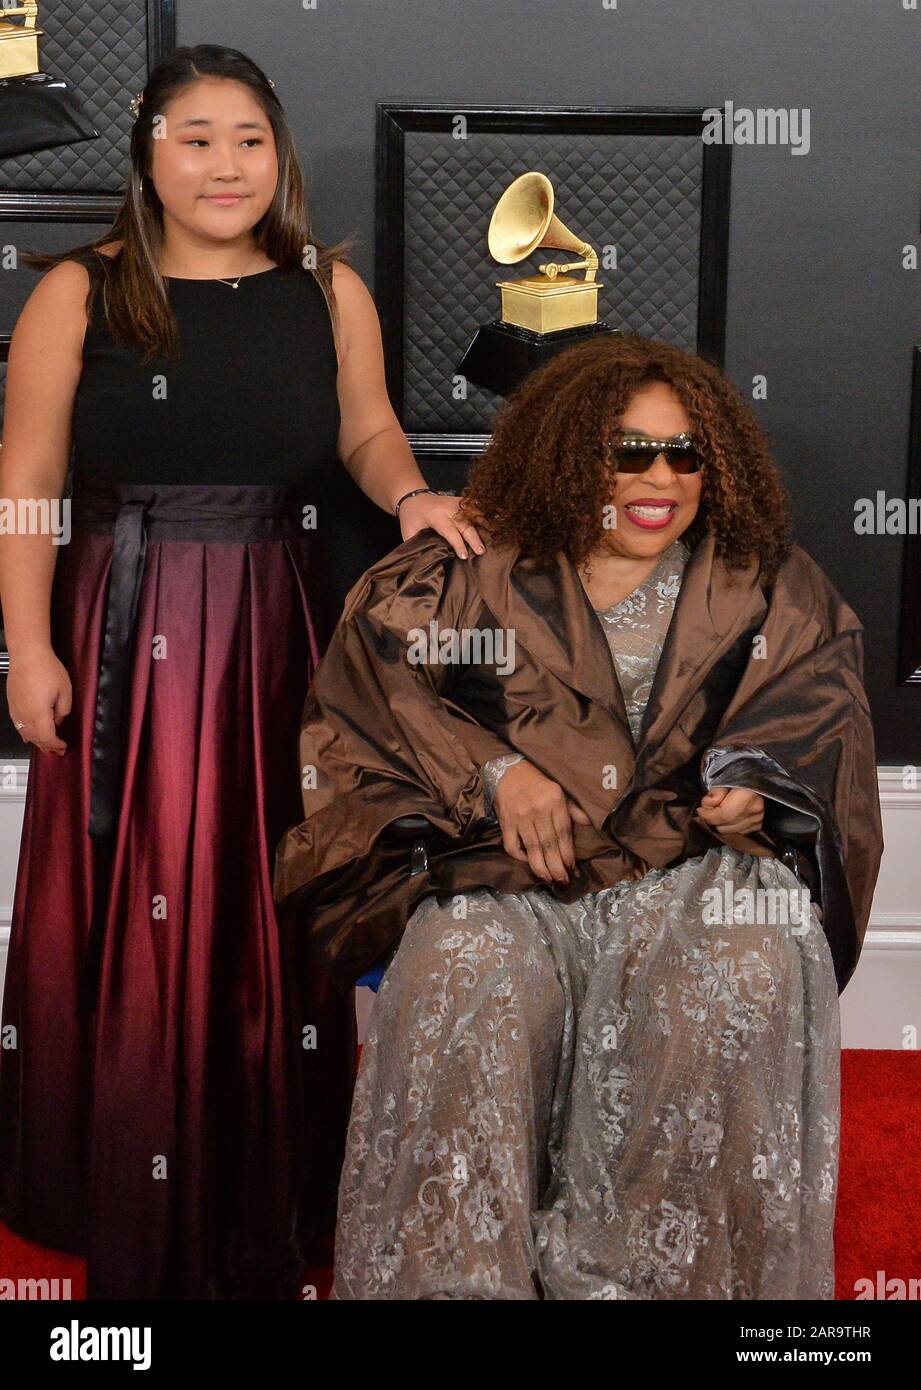 Los Angeles, CA, USA. 26th Jan 2020. (L-R) Roberta Flack and Kira Koga arrive for the 62nd annual Grammy Awards held at Staples Center in Los Angeles on Sunday, January 26, 2020. Photo by Jim Ruymen/UPI Credit: UPI/Alamy Live News Stock Photo